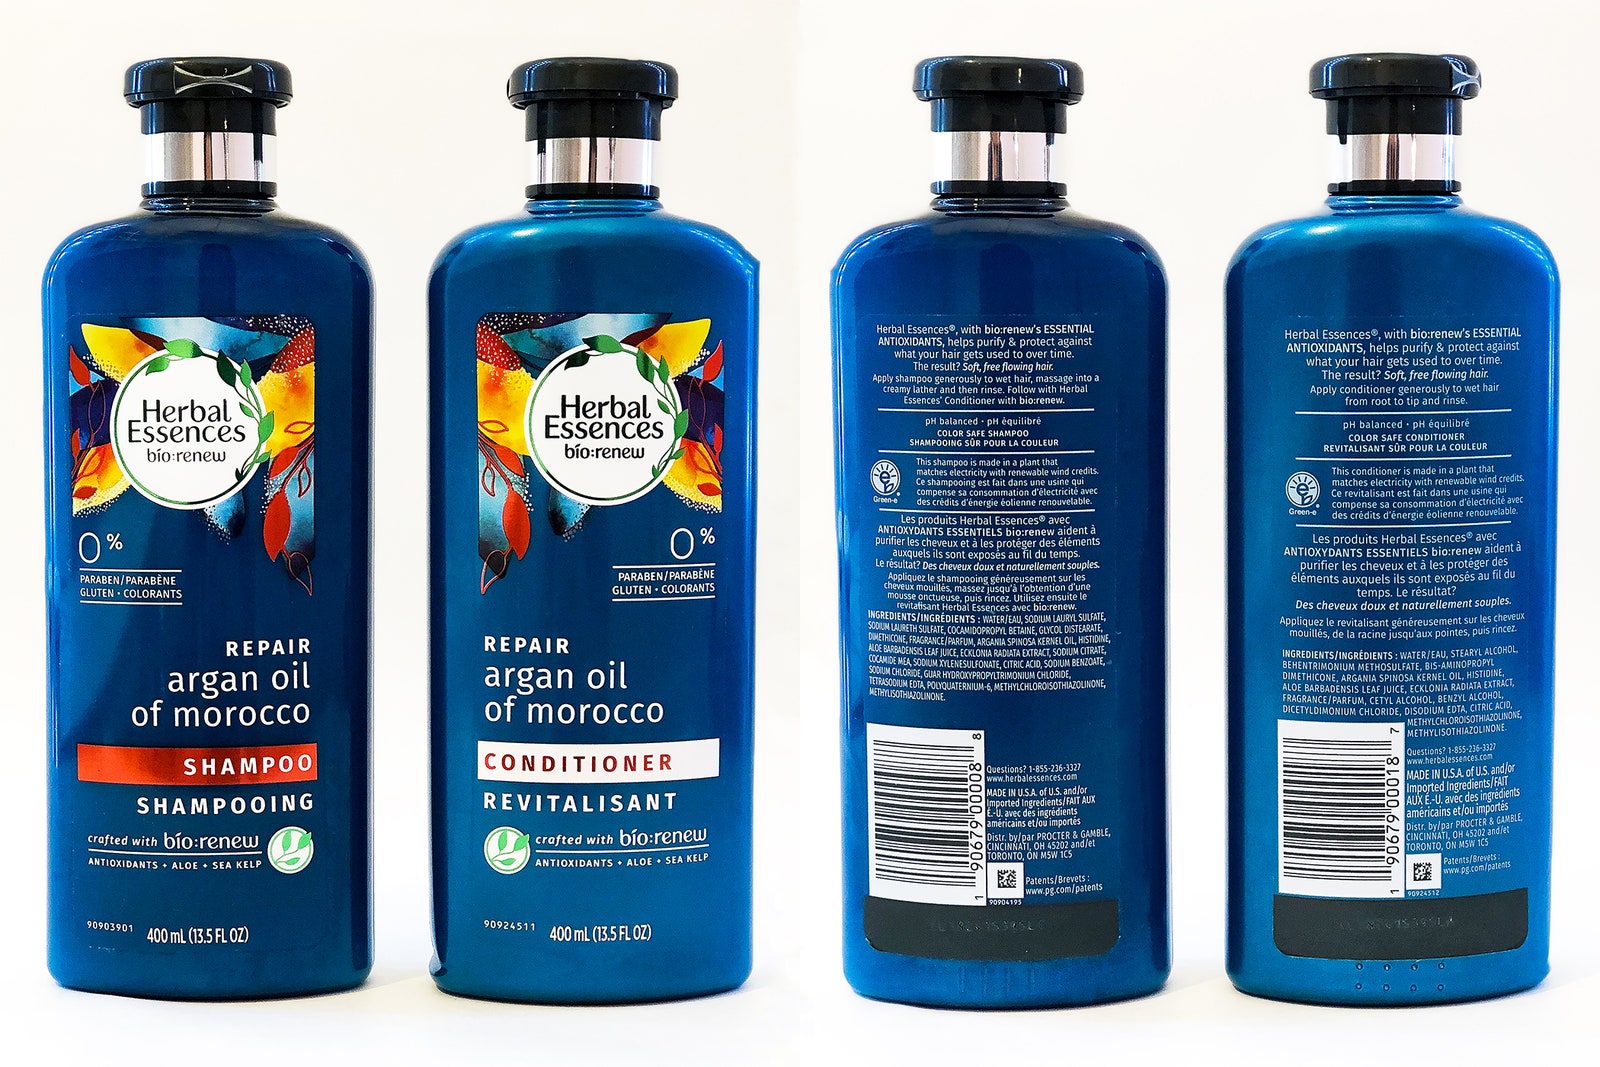 herbal essences bottles with tactile signifiers on the bottle